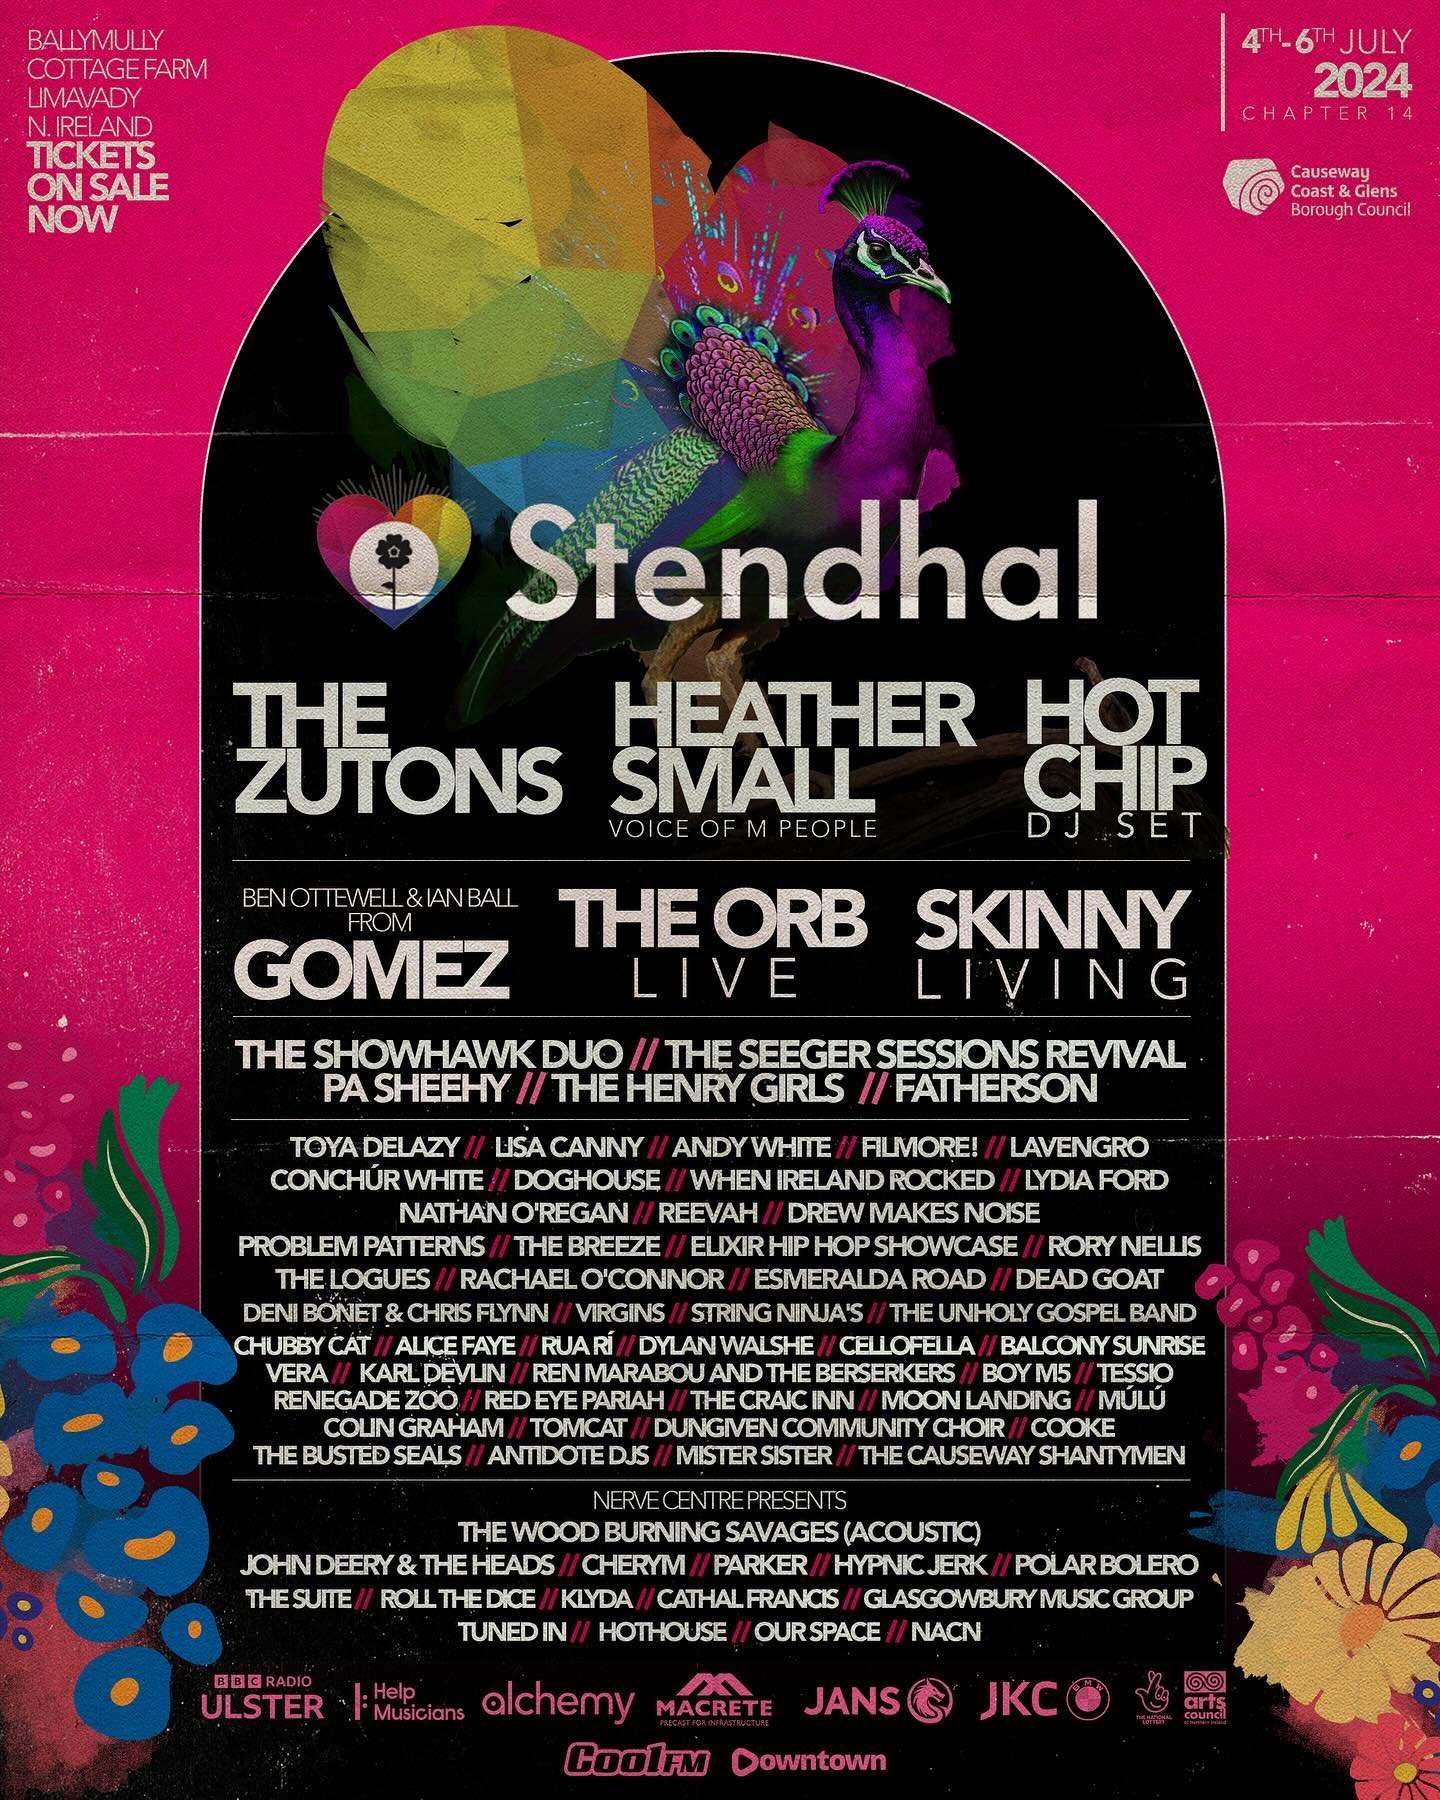 Delighted to see a member of our Creative Collective @ruarimusic and recent Gradam Ceoil bursary awardee @mulu_ceol on the bill at this year&rsquo;s @stendhalireland festival. That will be a lovely weekend of music in Limavady!